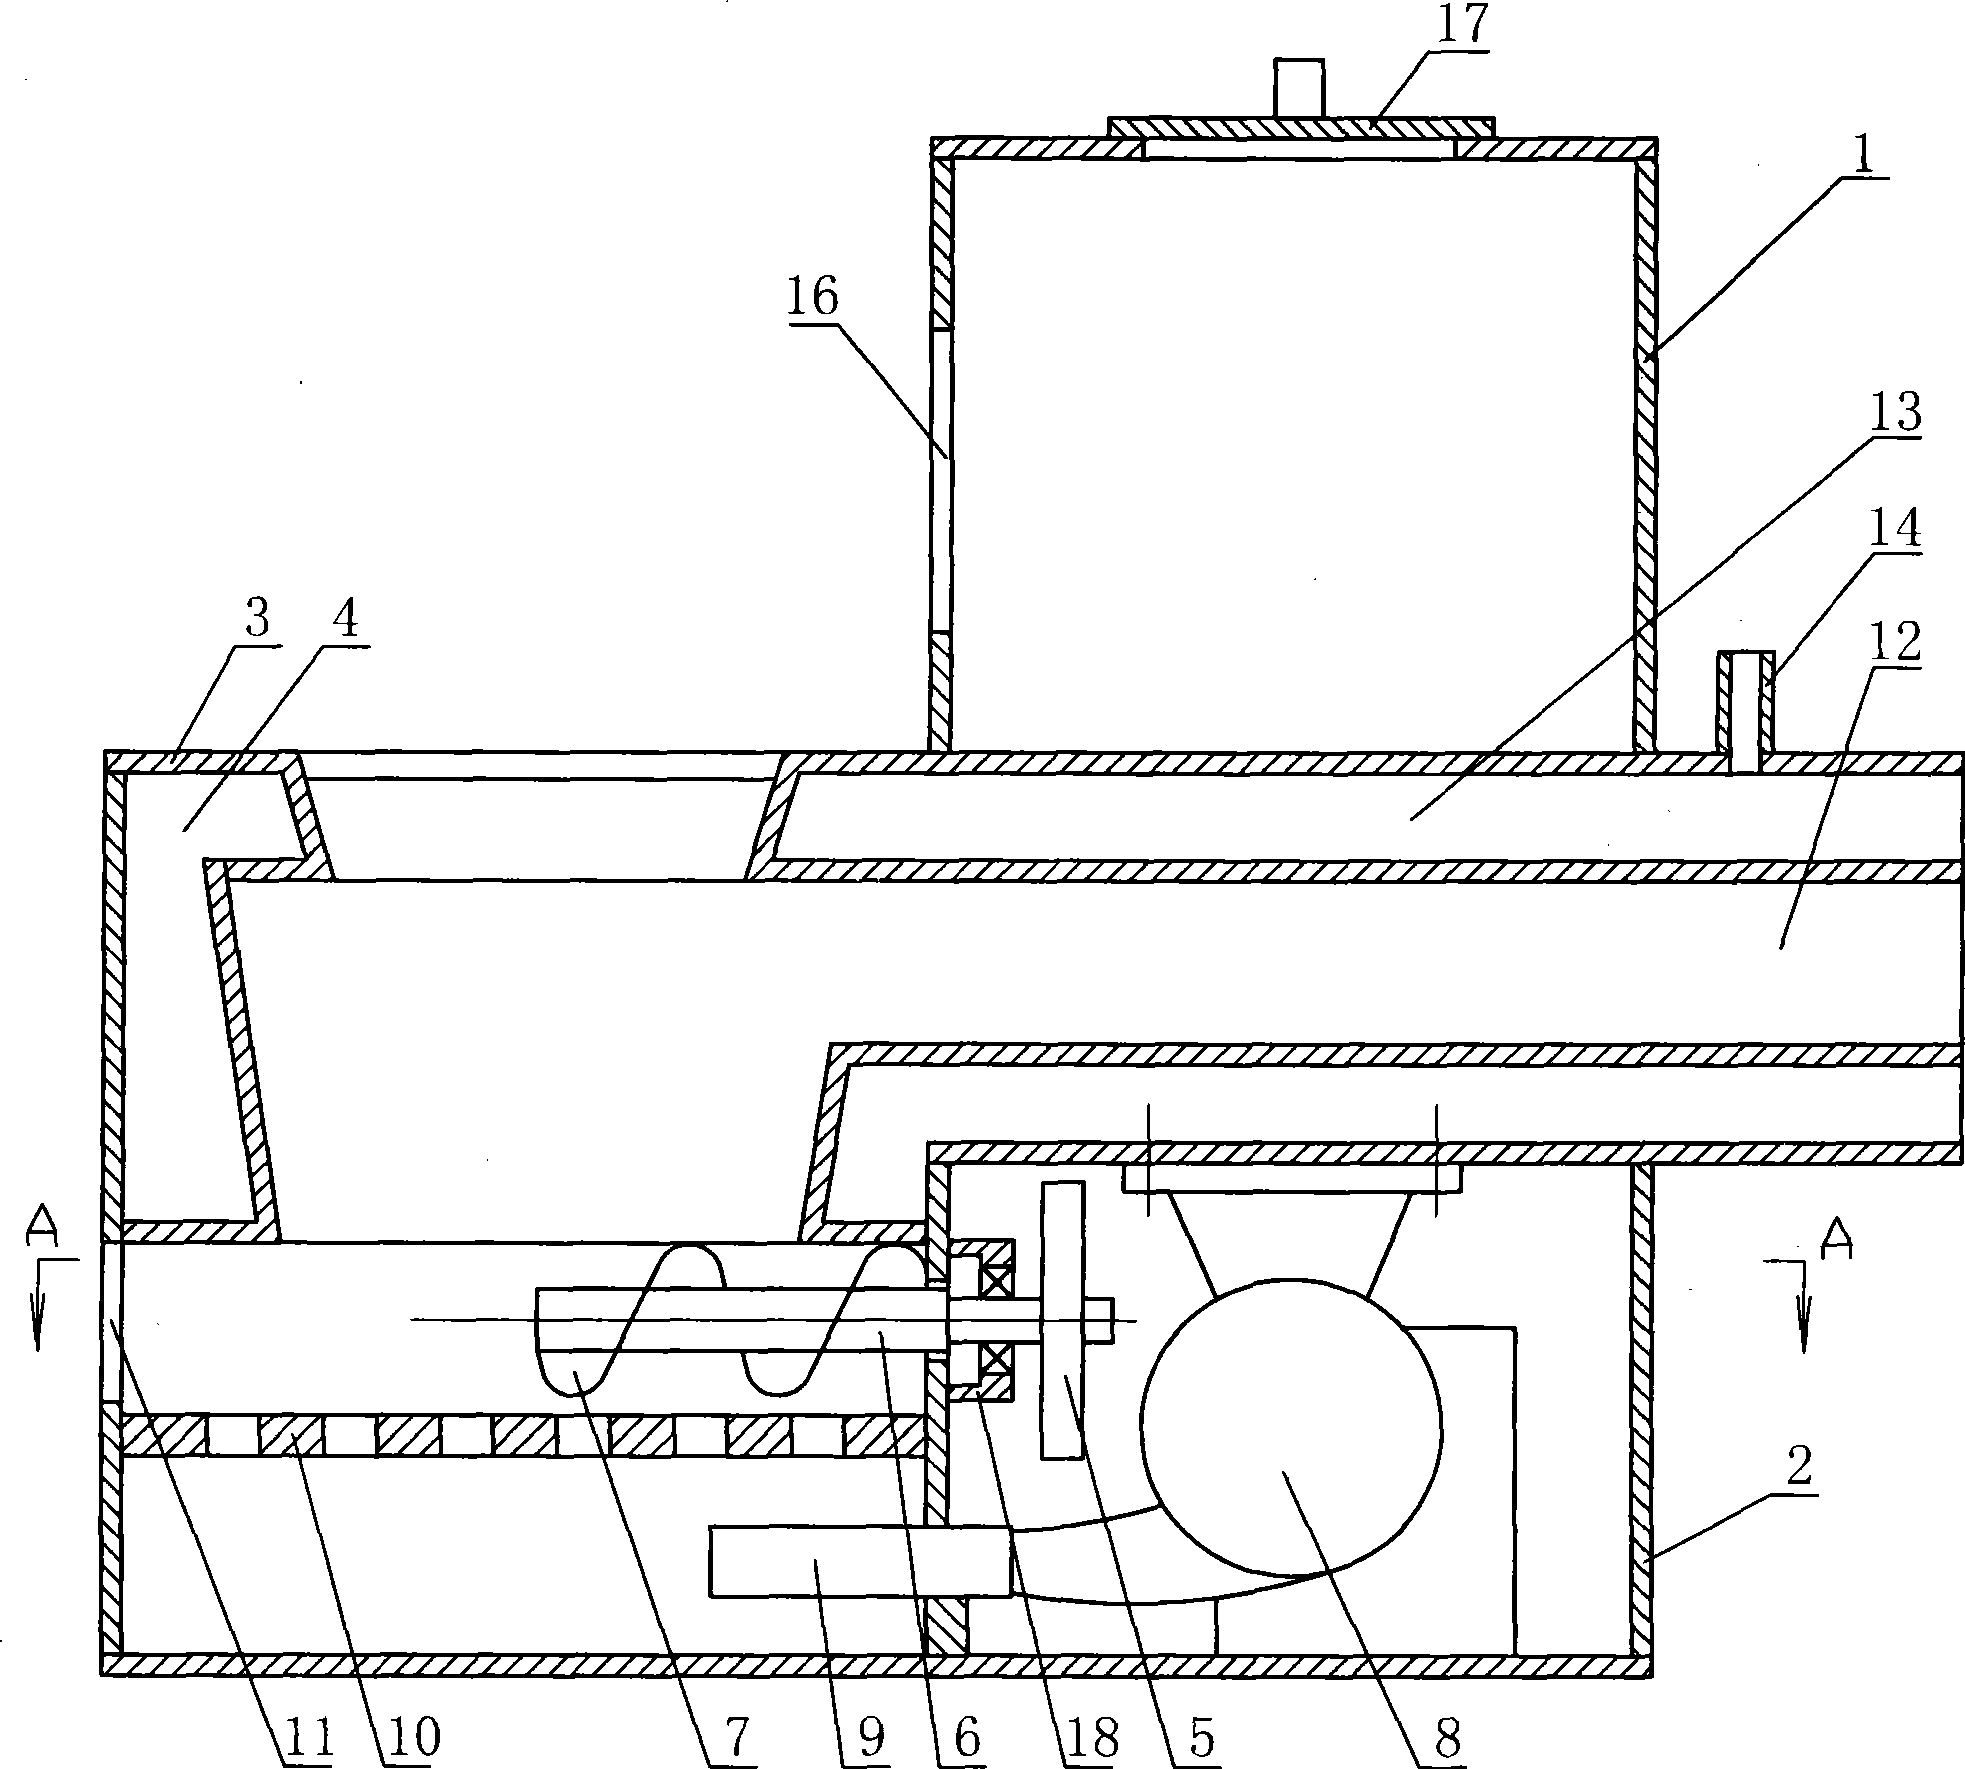 Direct combustion furnace